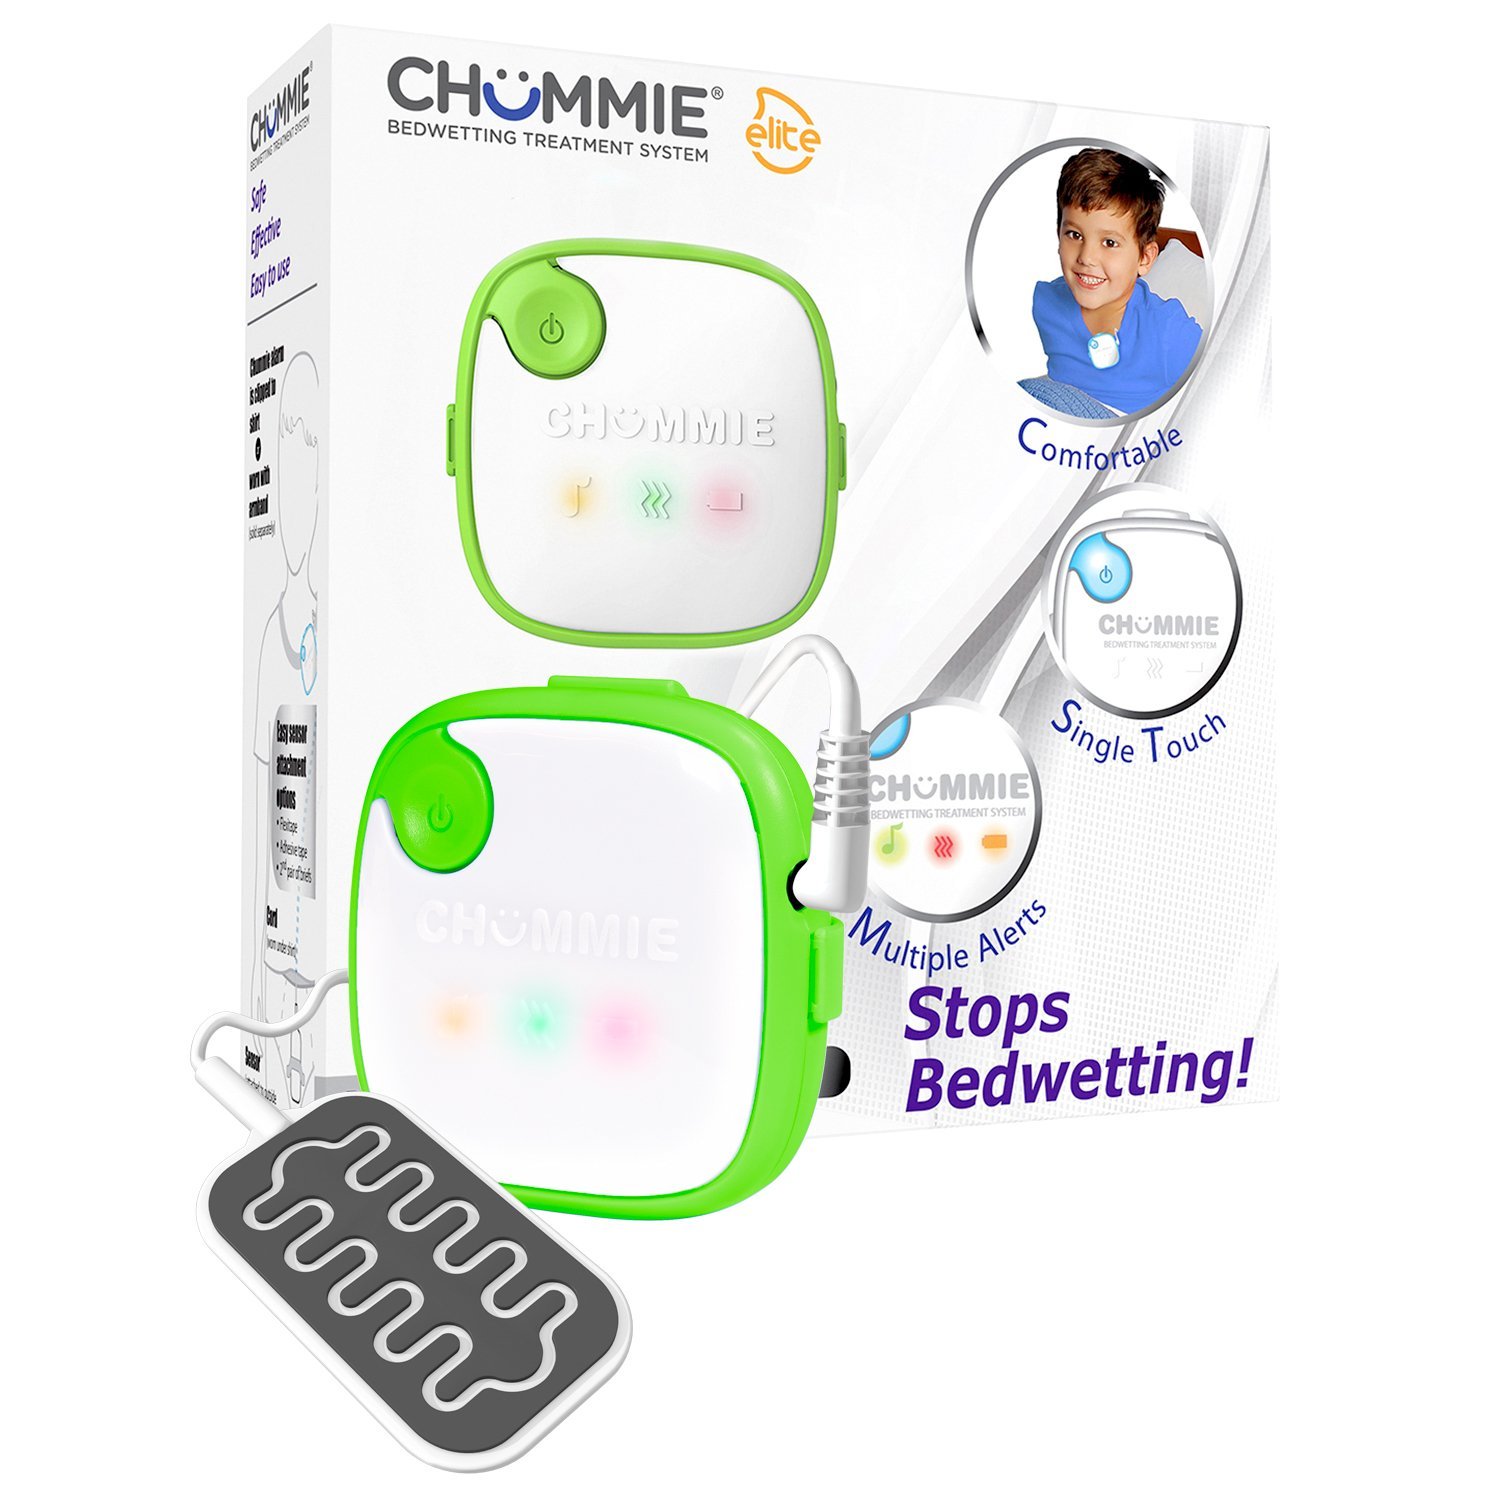 Chummie Elite Bedwetting Alarm For Children And Deep Sleepers  Award Winning Bedwetting Alarm System With Loud Sounds And Strong Vibrations Green